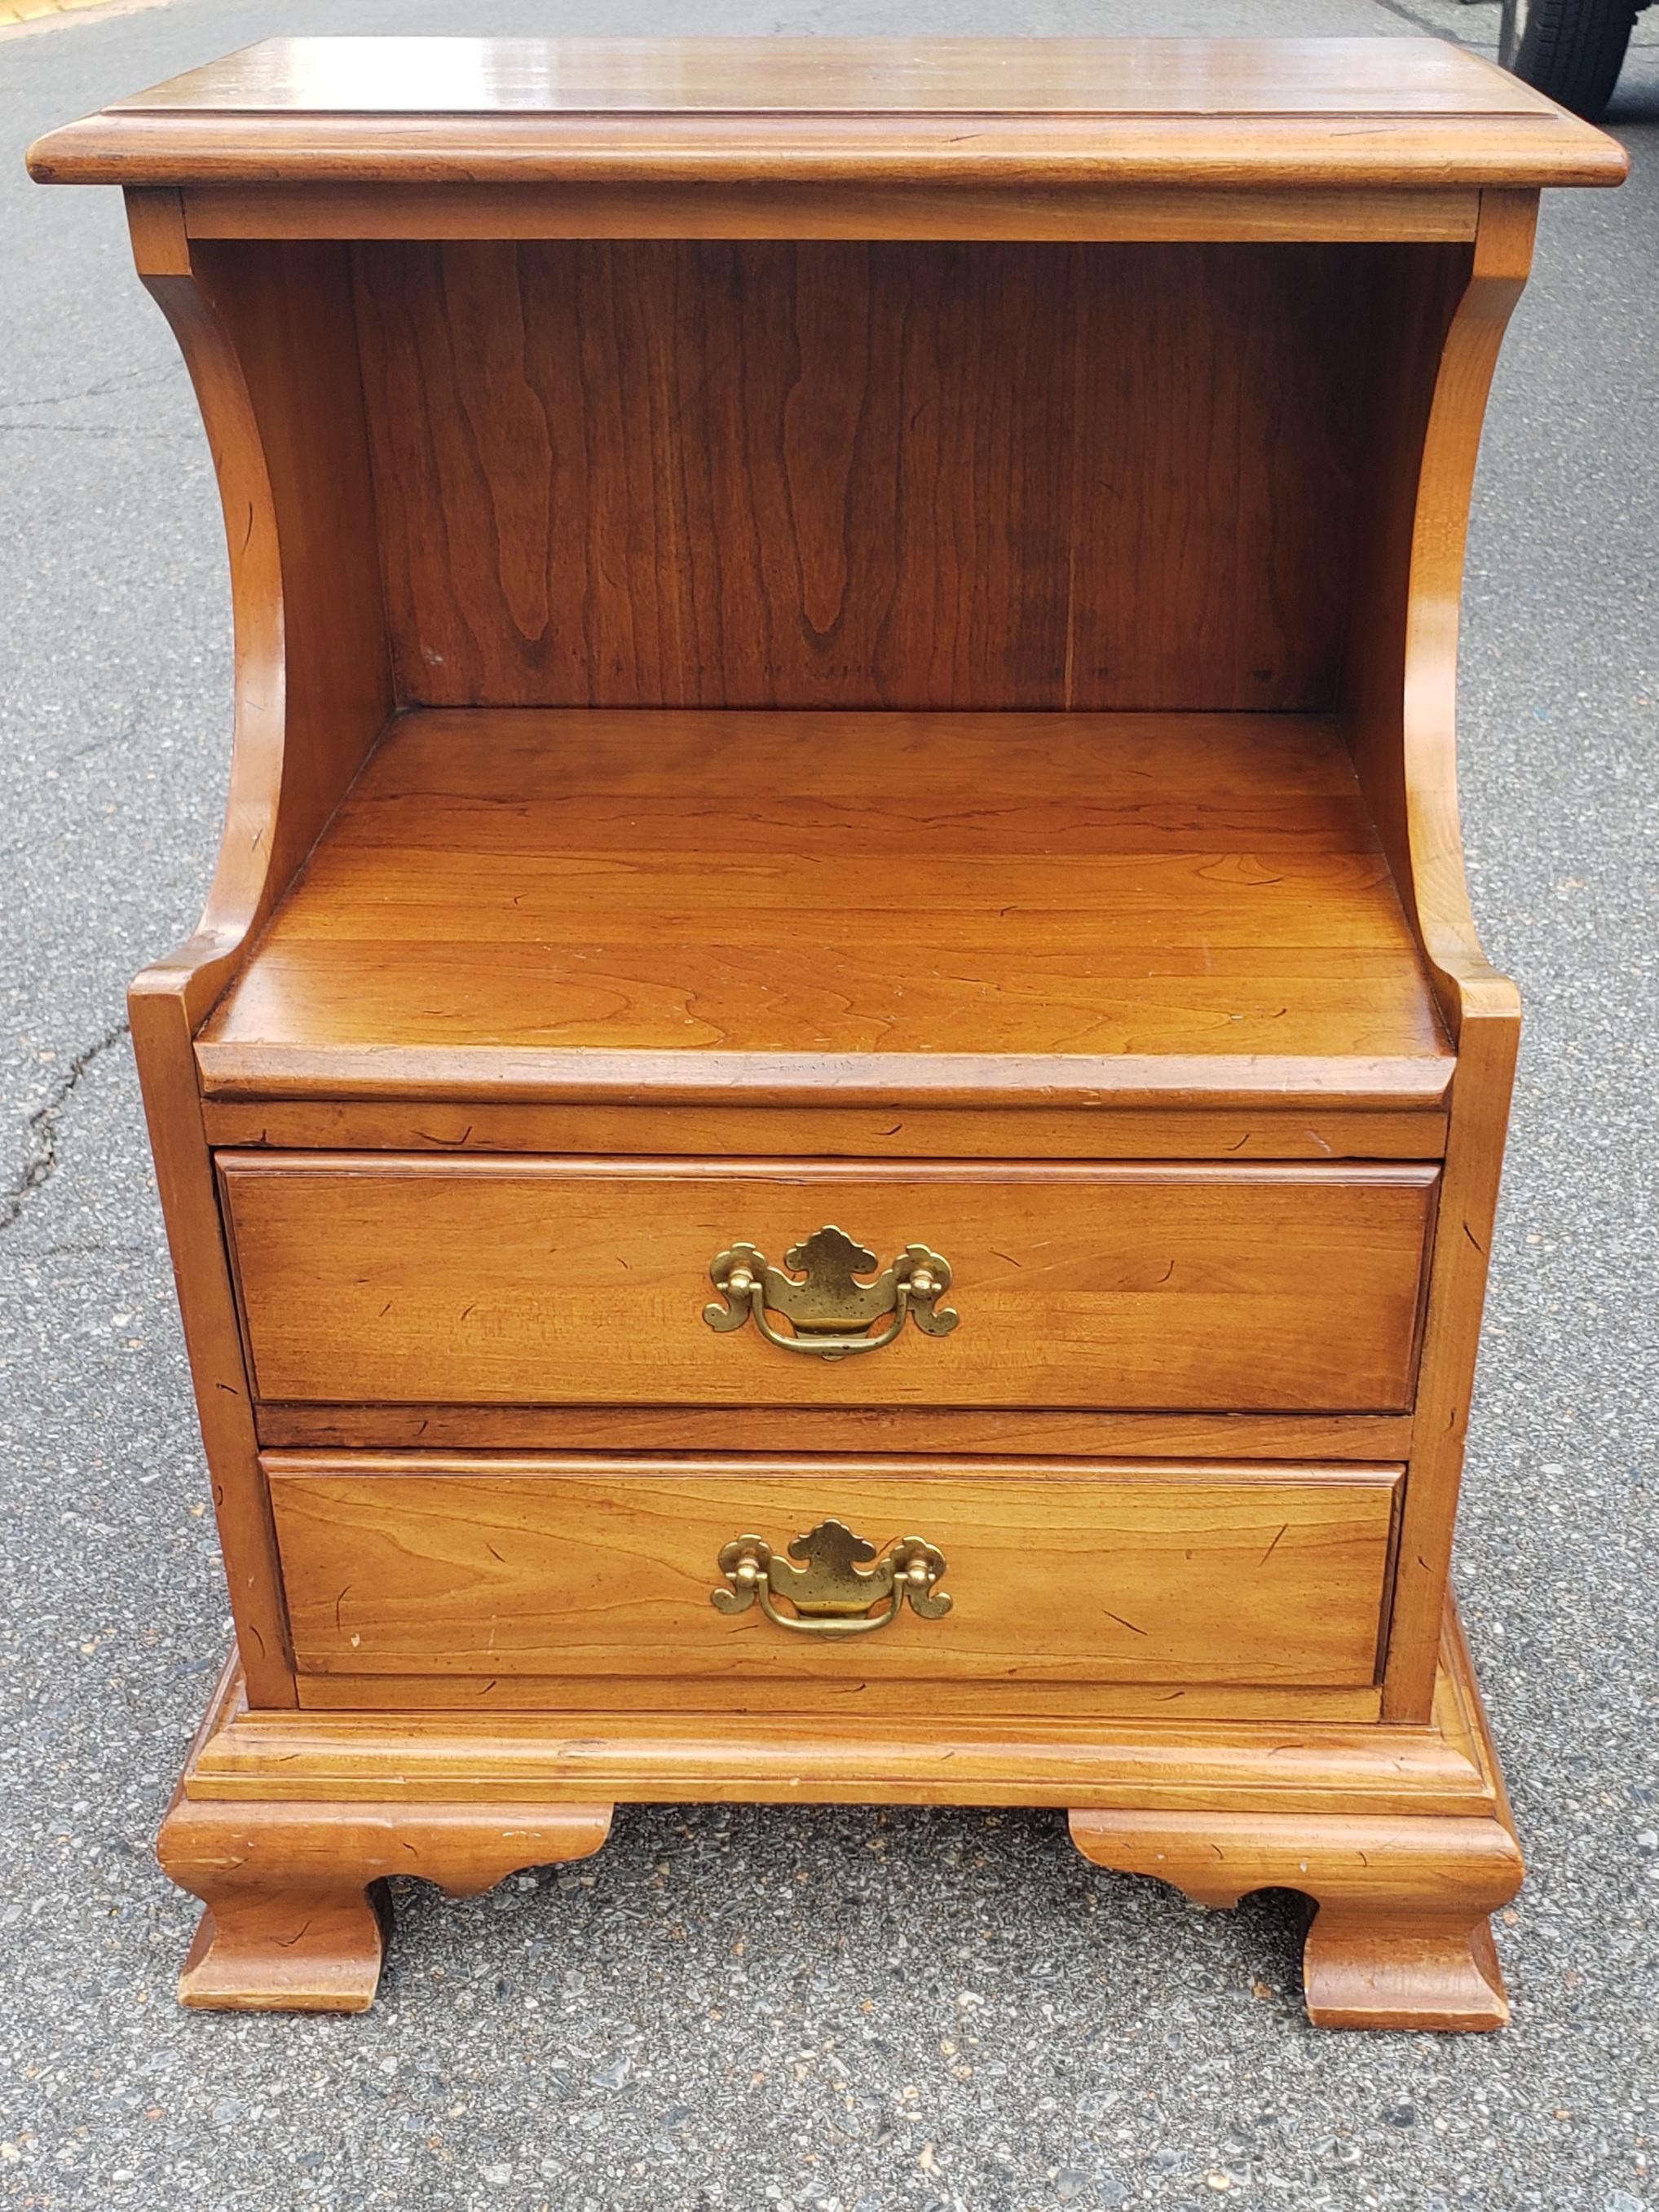 A midcentury Refinished Chippendale tiered 2-Drawer Light Wild Cherry Nightstand 
 This is part of a set with a double bed, a 9-drawer chest of drawers and a Double dresser.